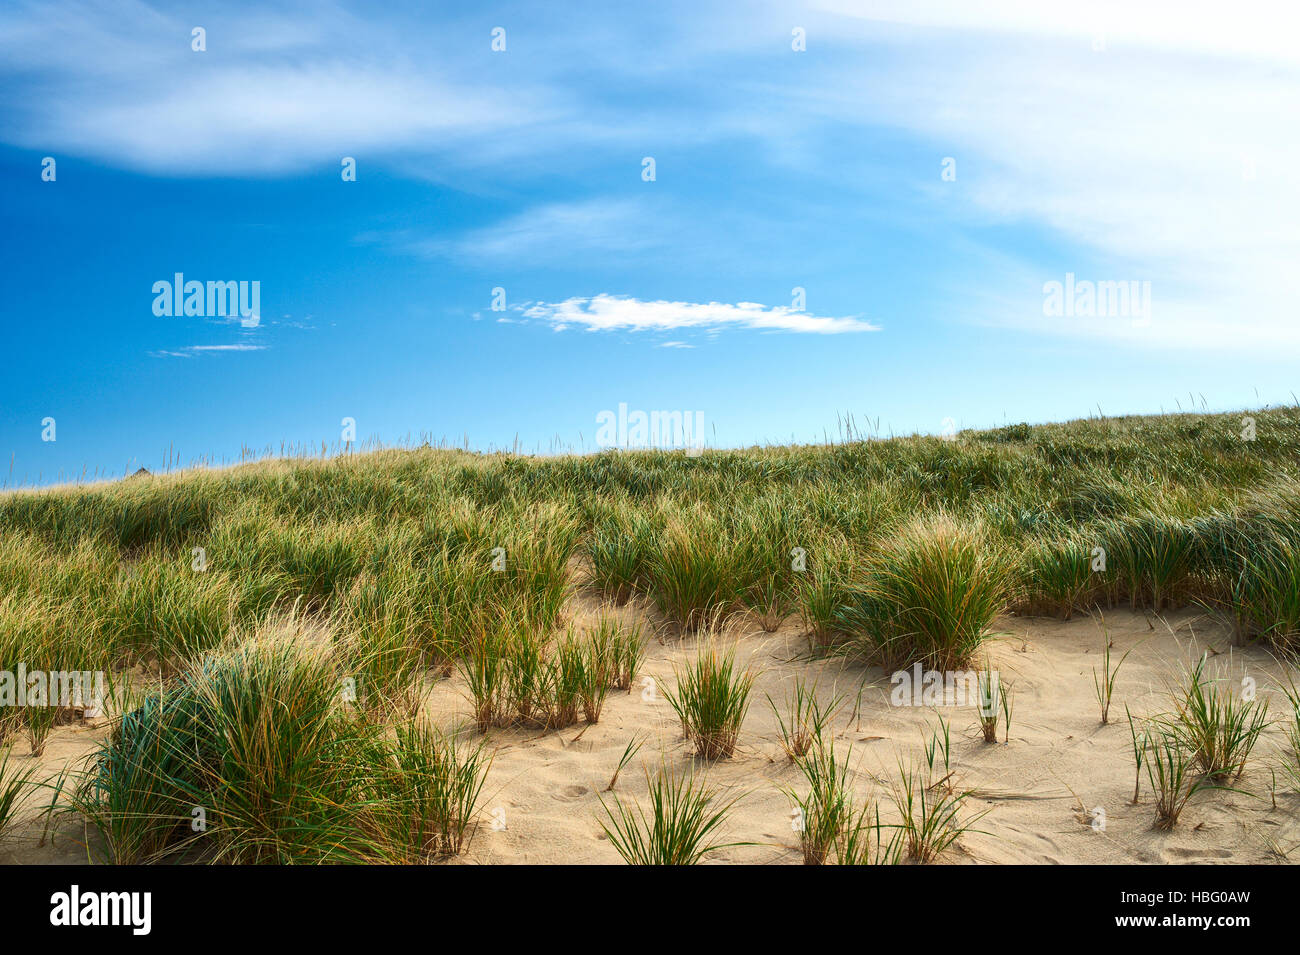 Landscape with sand dunes at Cape Cod Stock Photo